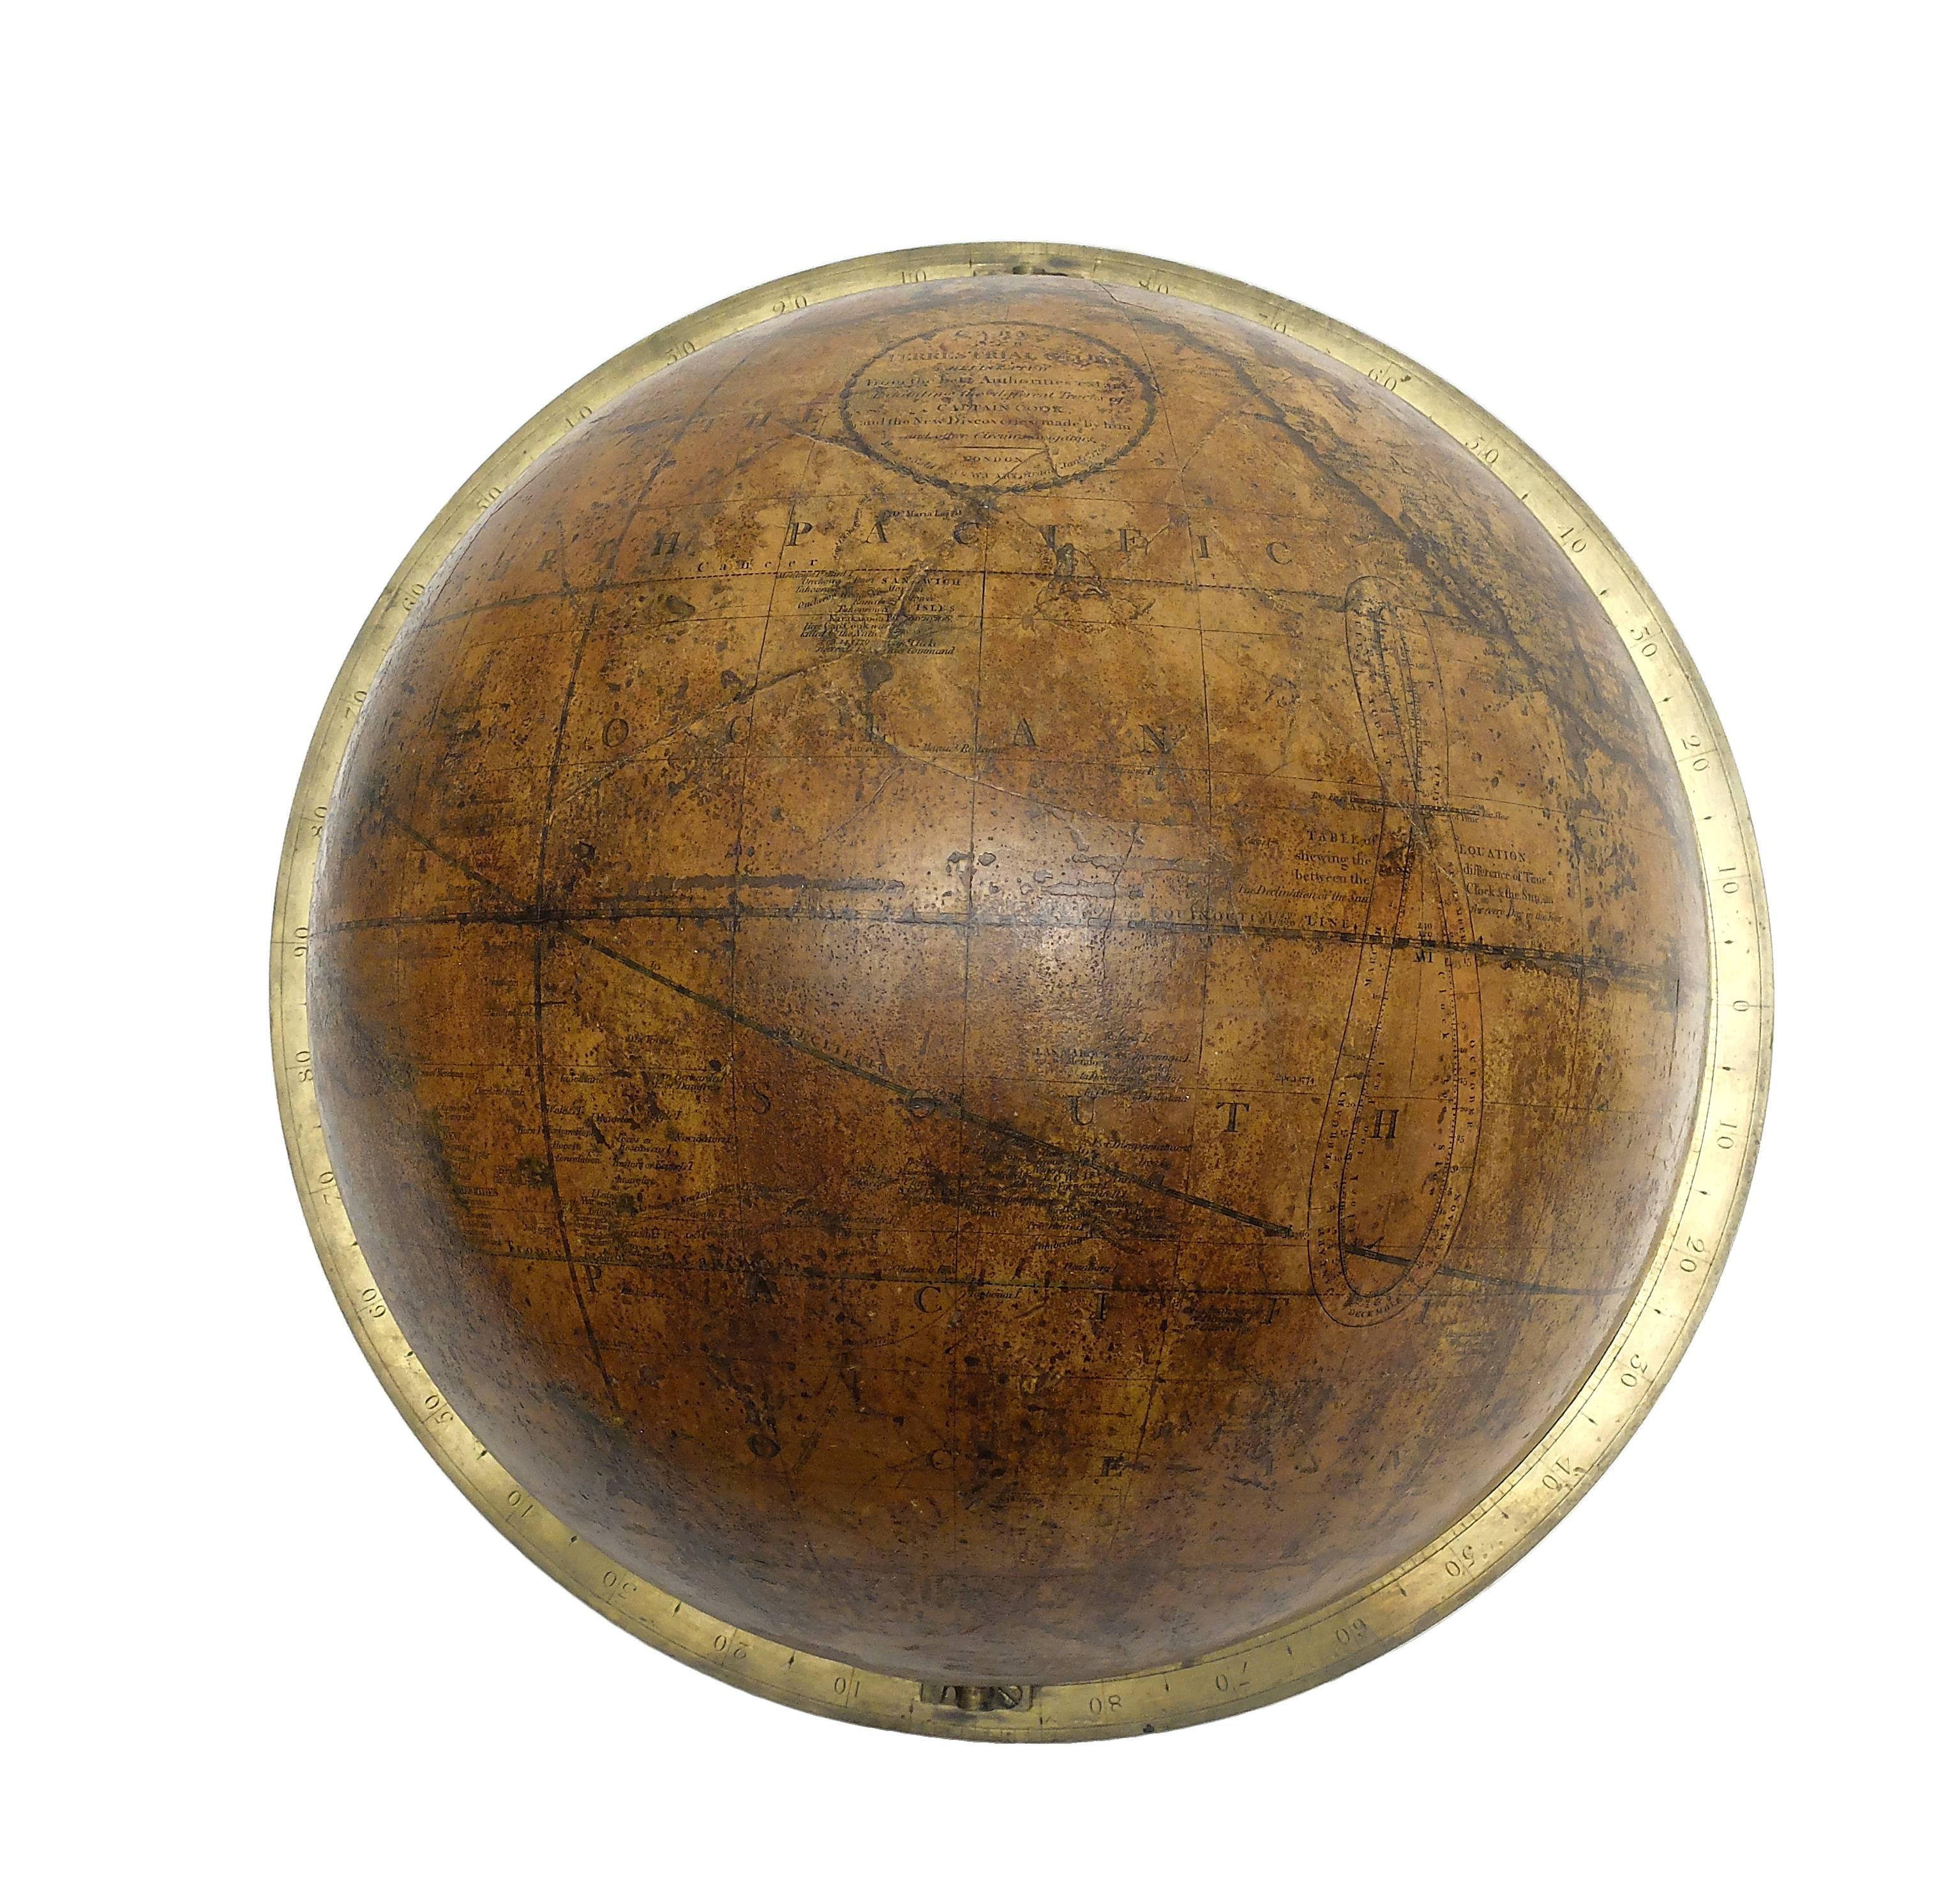 An important English terrestrial globe, signed Cary, London. 5